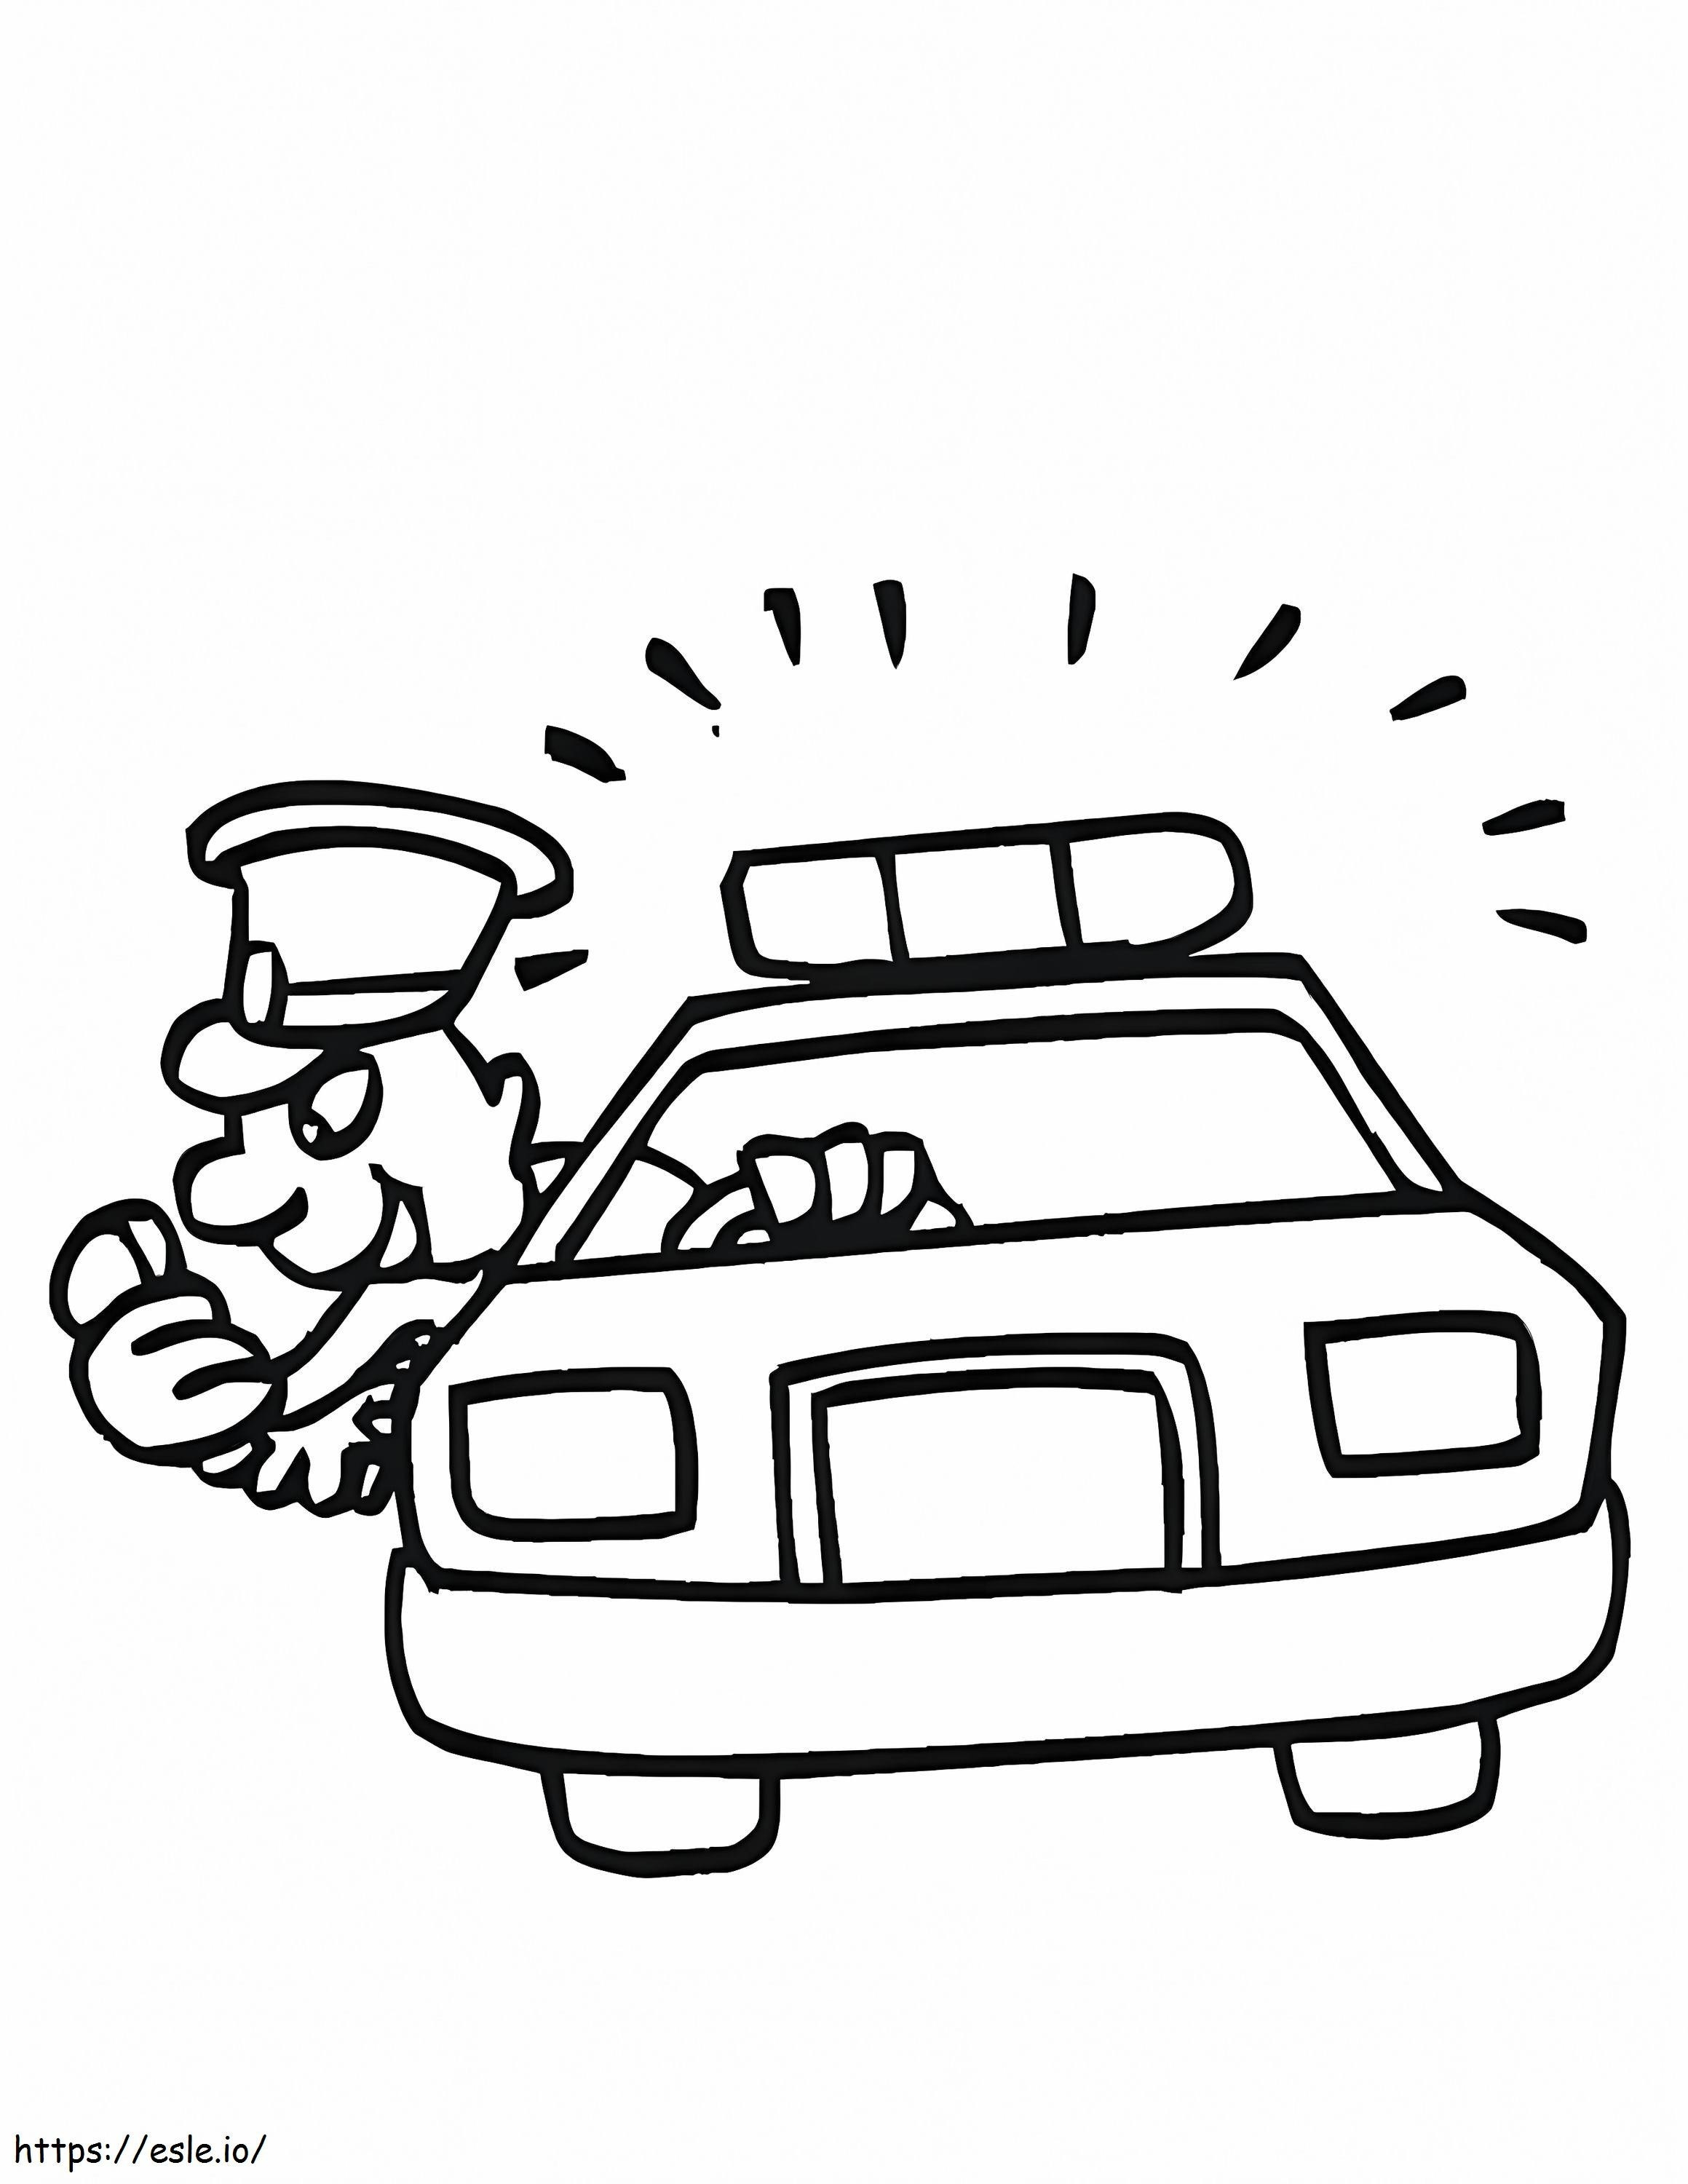 Funny Policeman In The Car coloring page